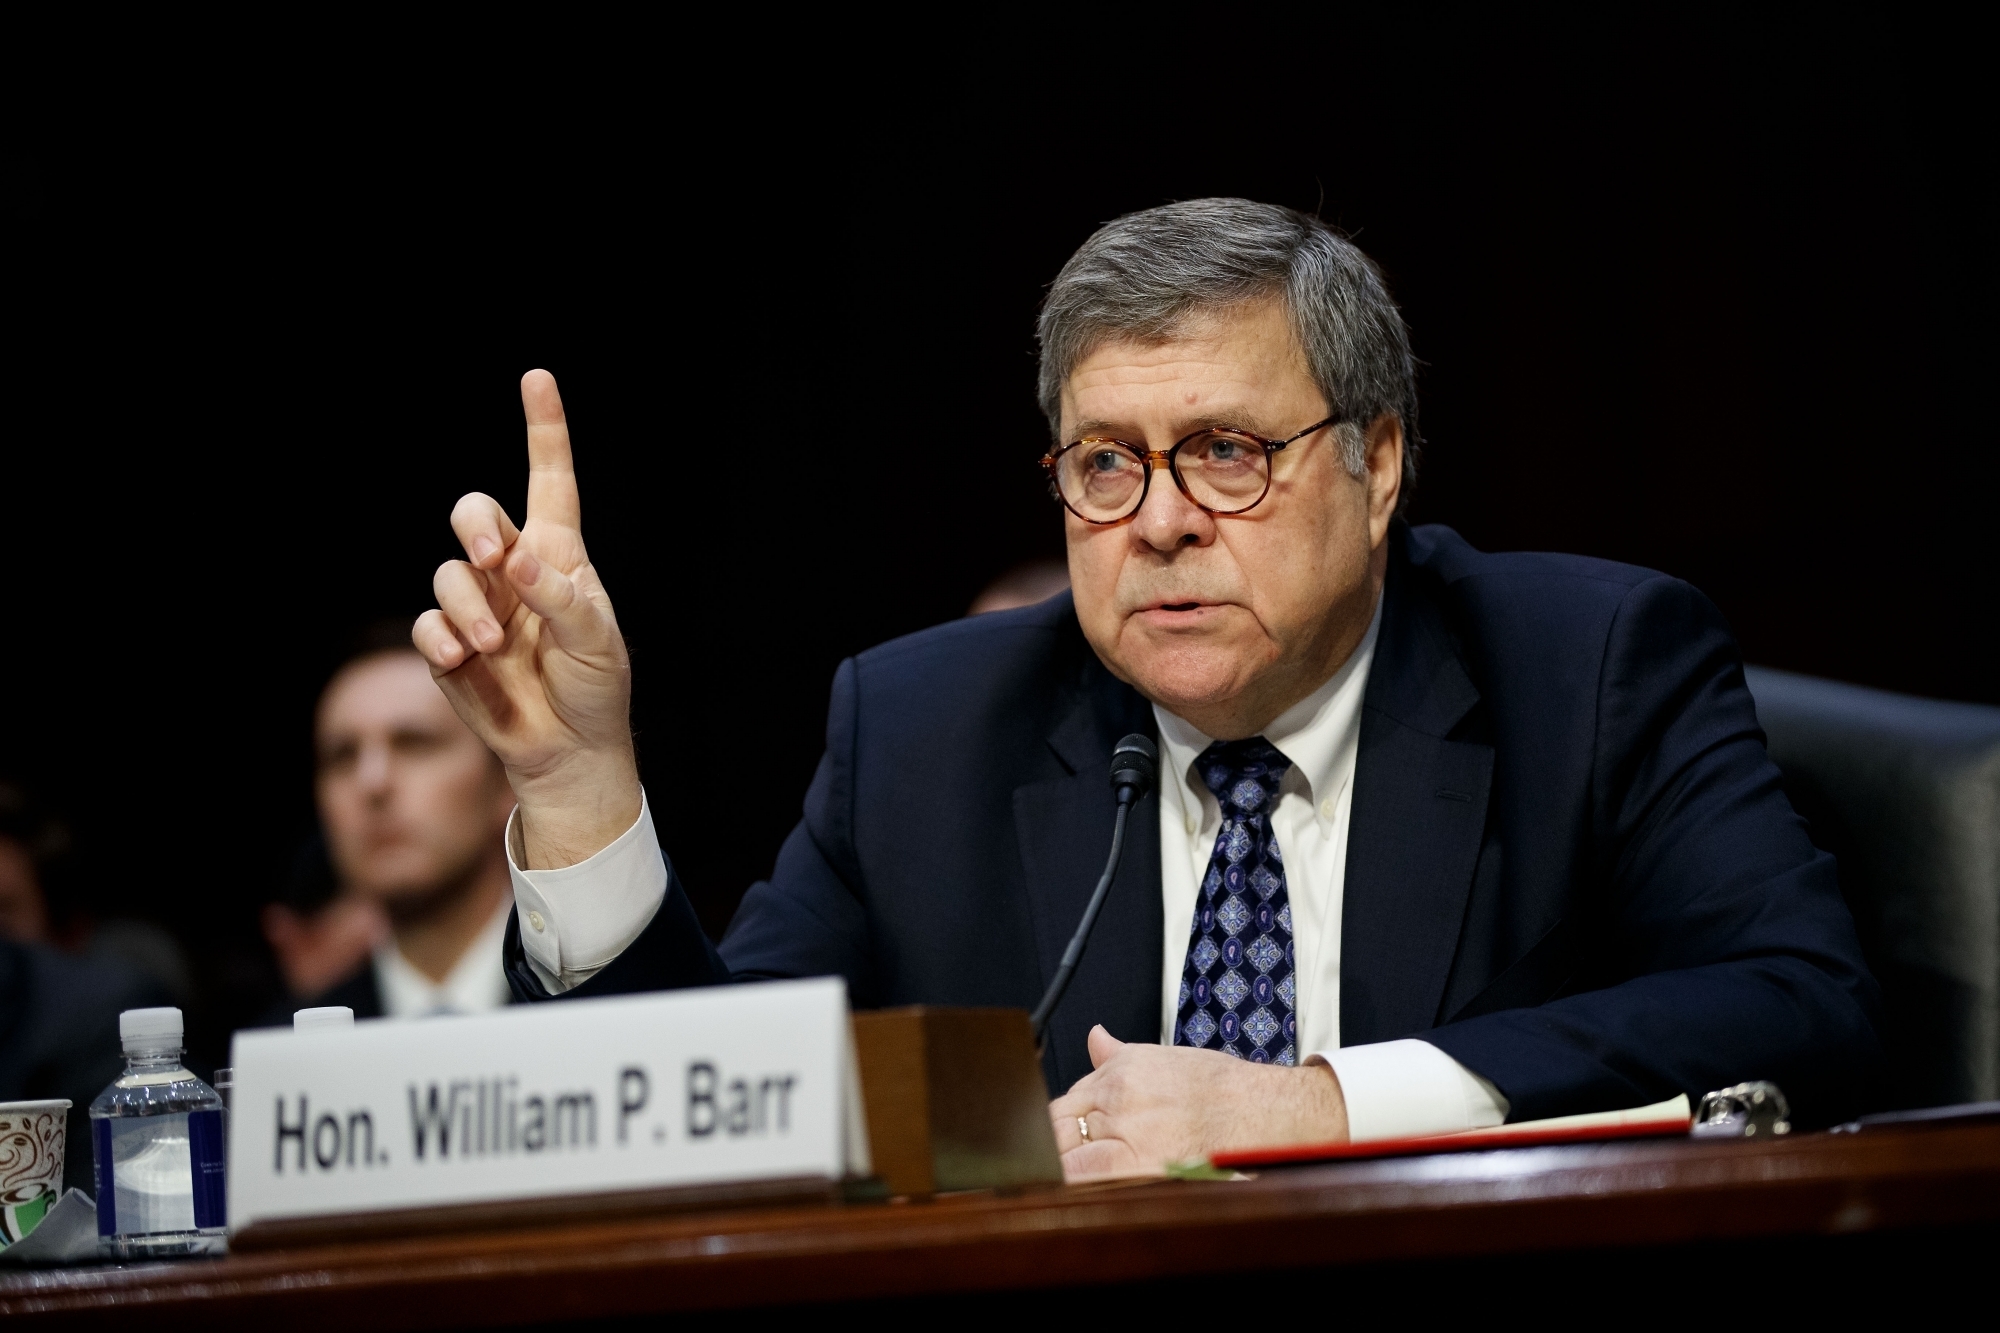 Chicago mayor disputes impact of 'Operation Legend' as Barr touts its success